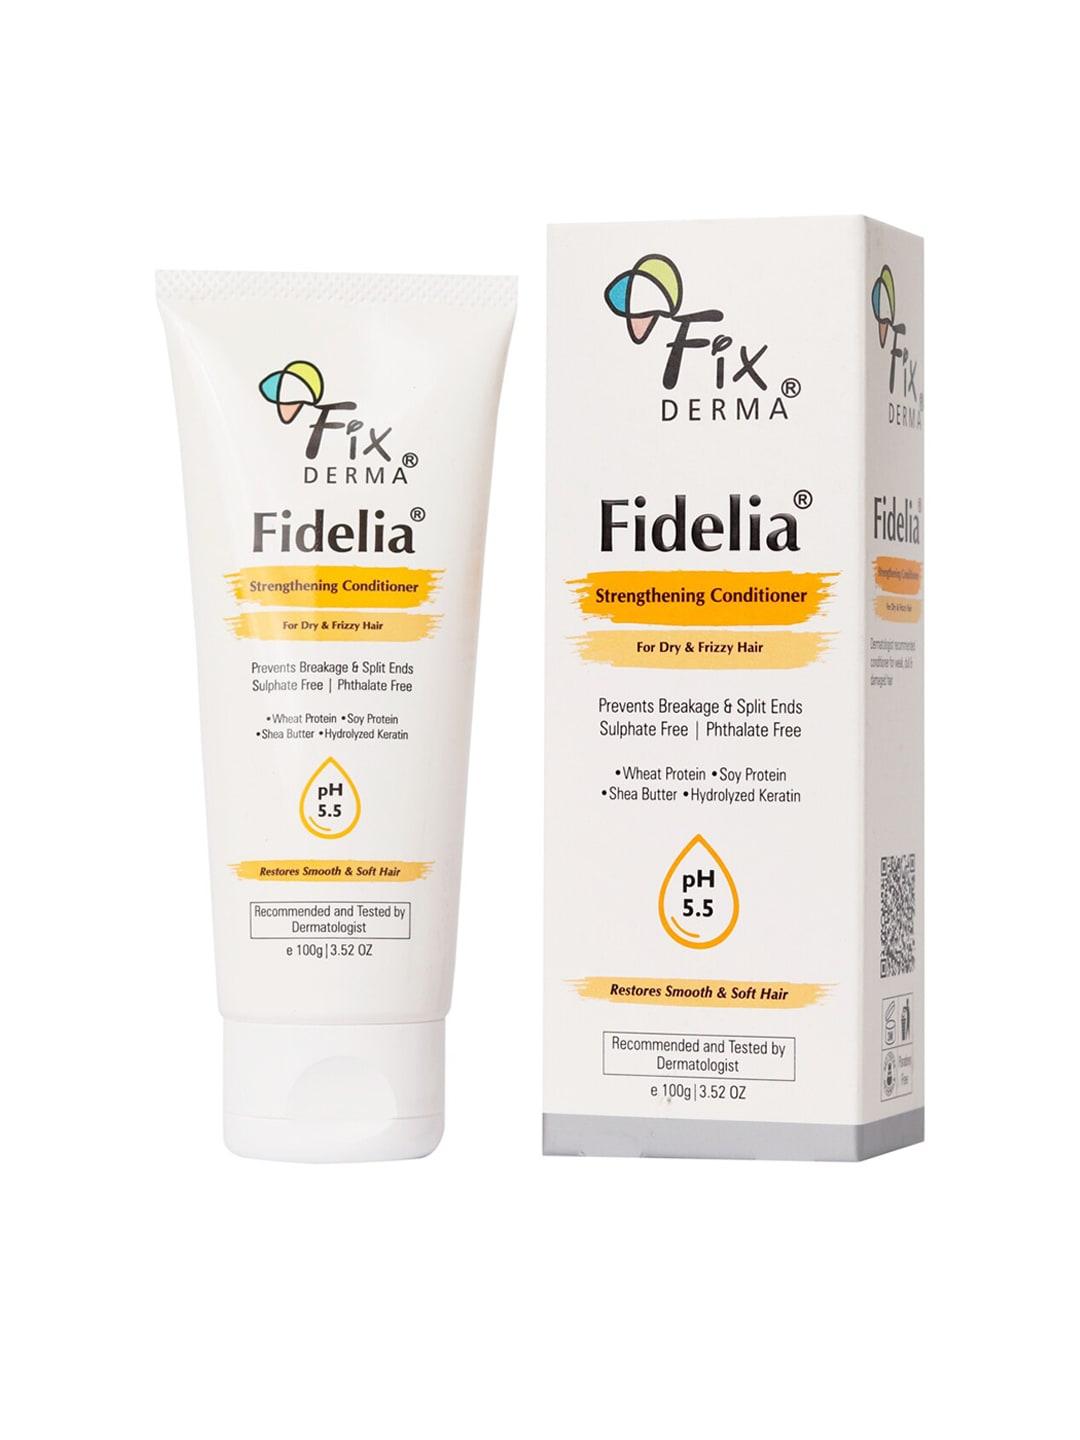 fixderma-fidelia-strengthening-hair-conditioner-with-shea-butter-for-dry-frizzy-hair--100g